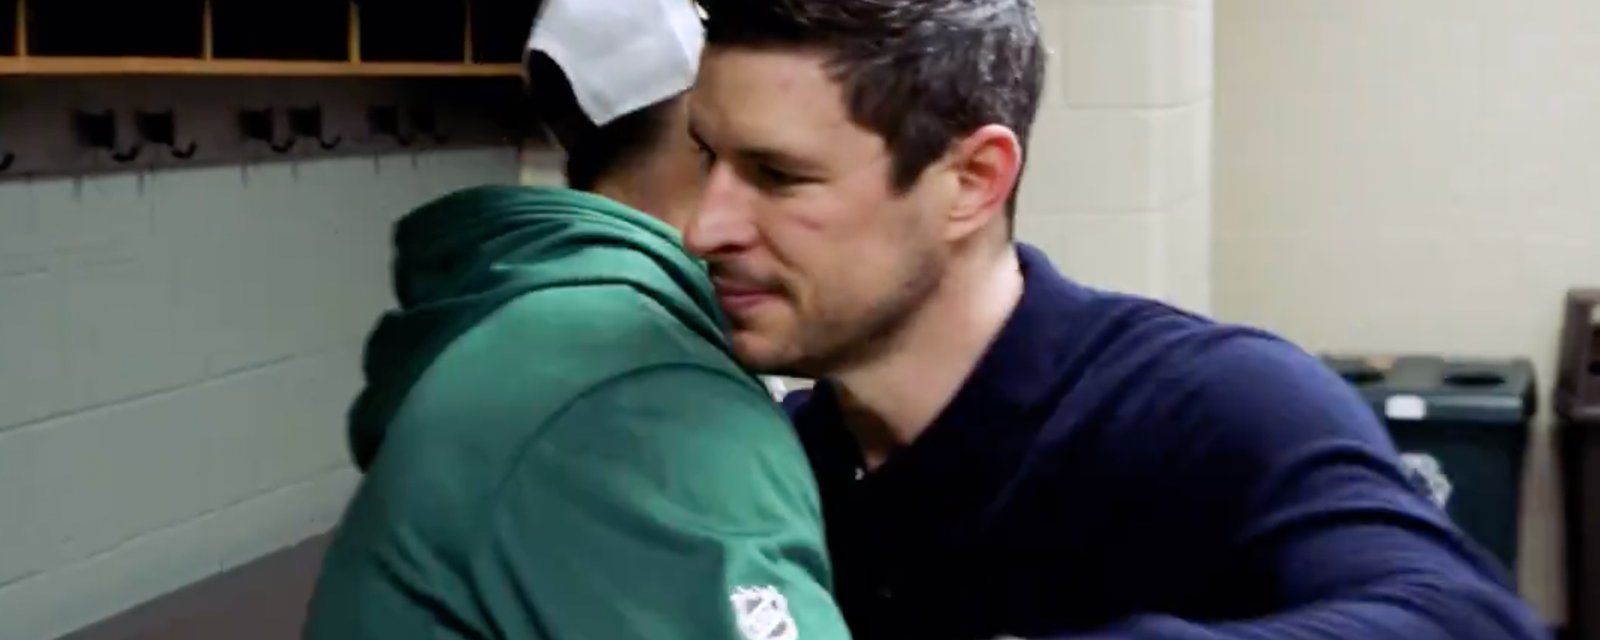 Emotional reunion between Fleury and Crosby before tonight’s game